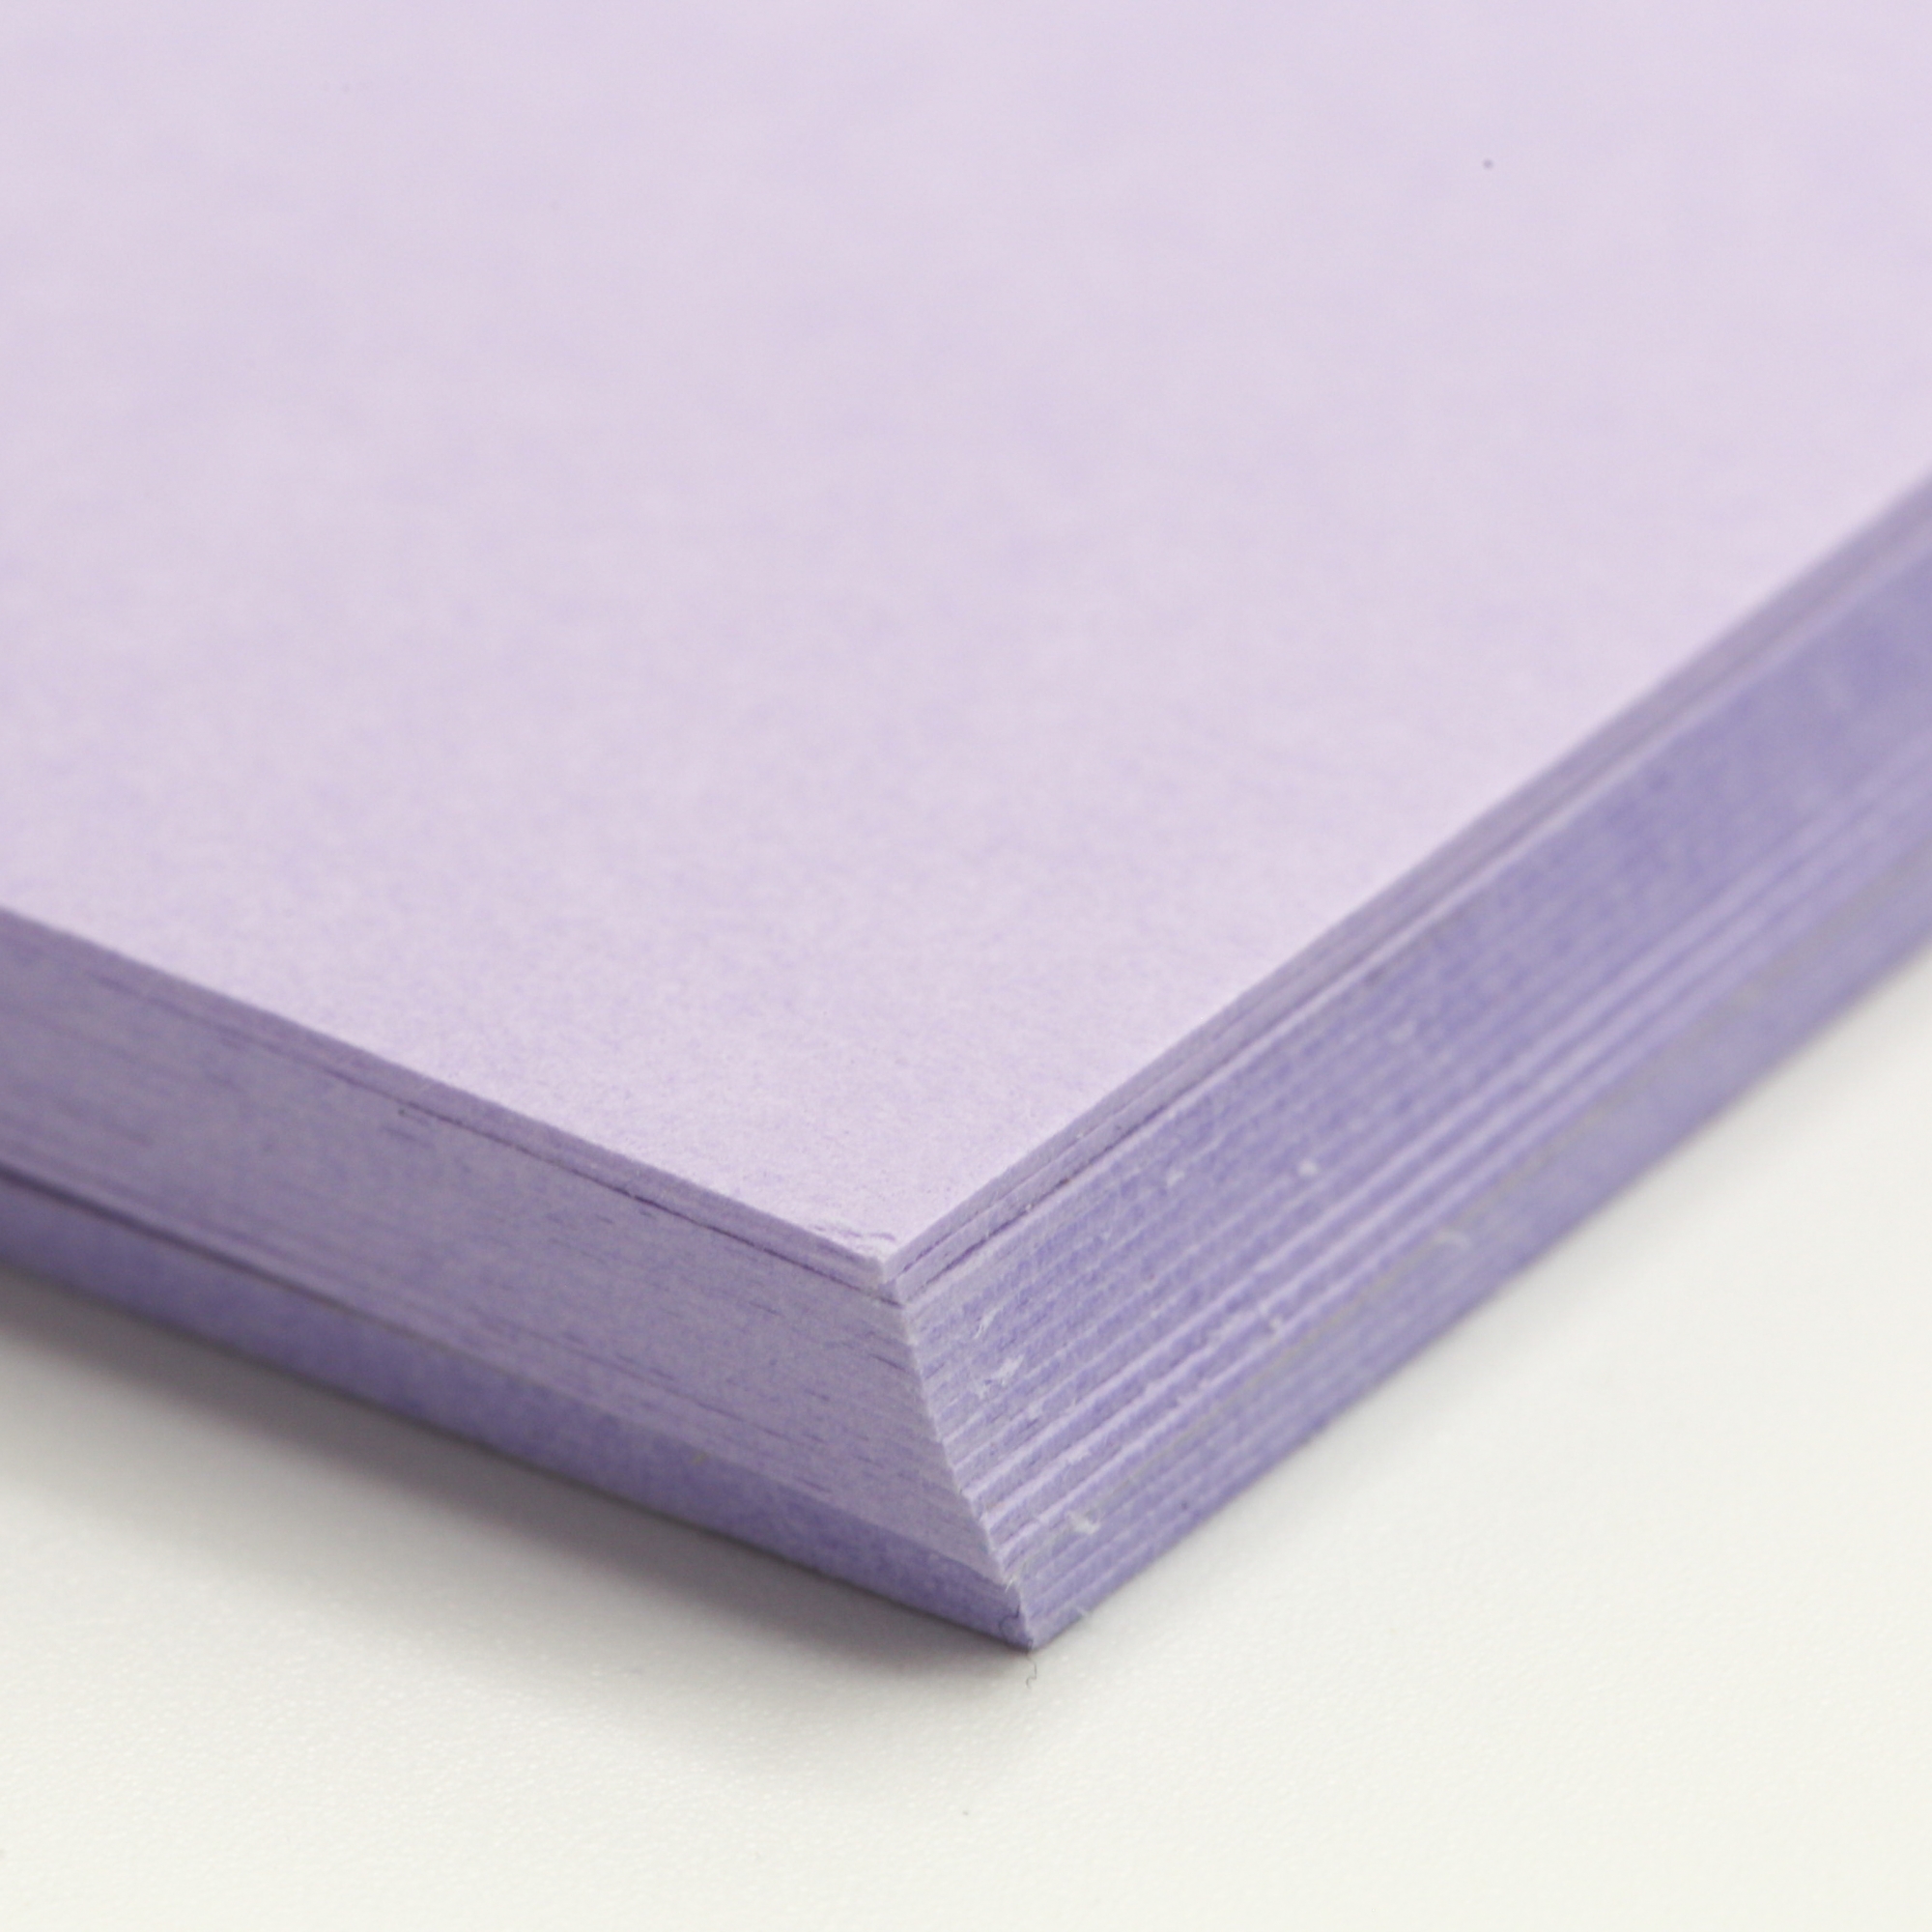 Burano LILAC (06) - 12X12 Lightweight Cardstock Paper - 52lb Cover